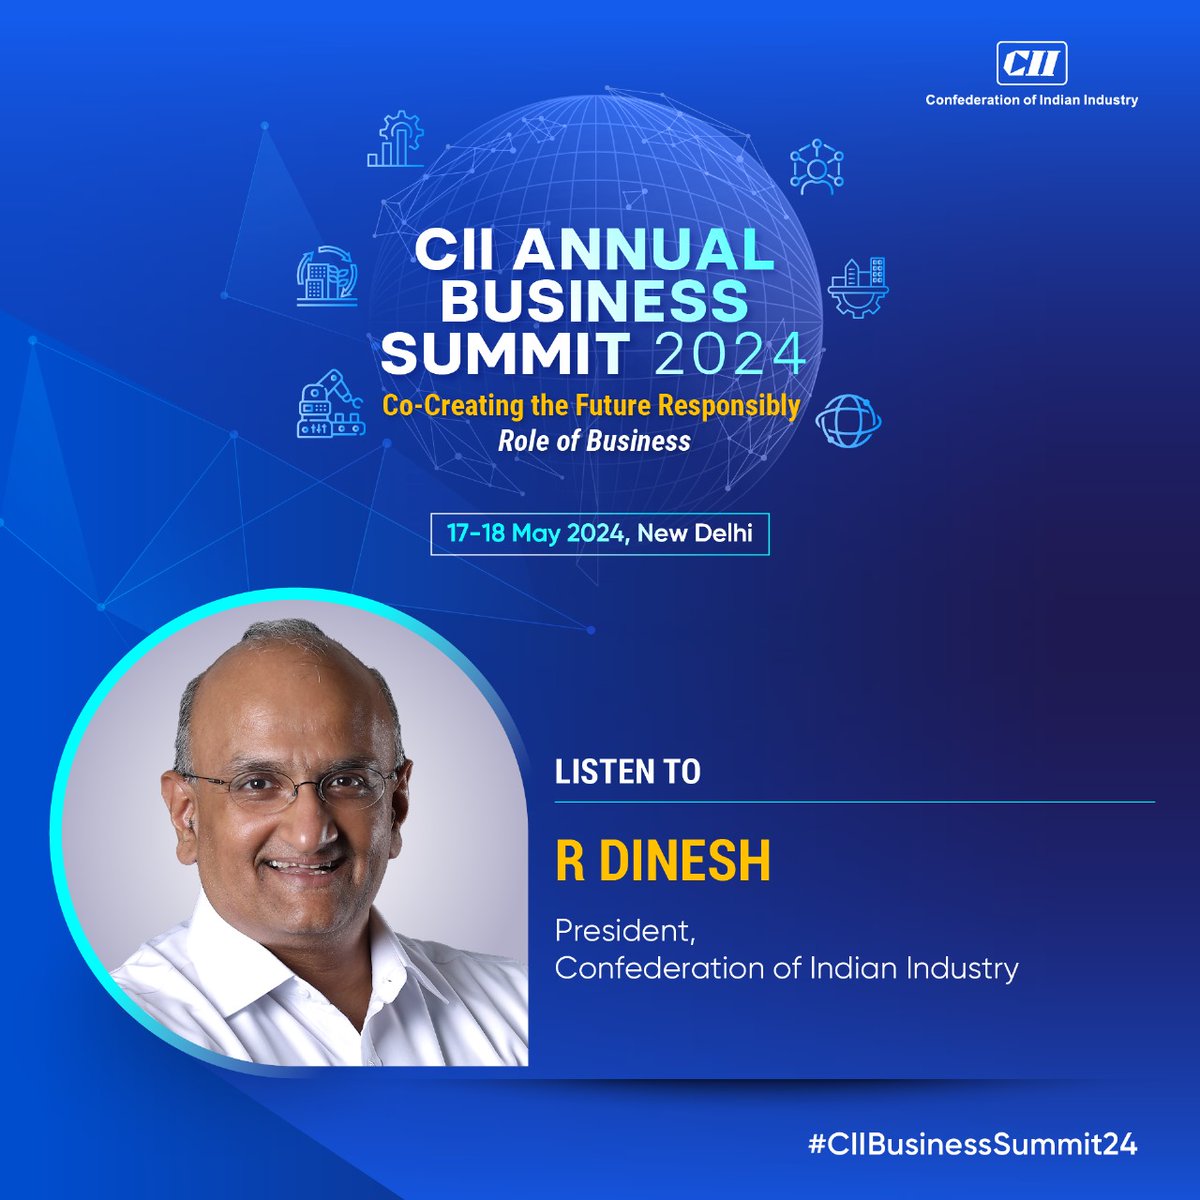 R Dinesh, President, CII will share views at the CII Annual Business Summit 2024! Join the discussion as top experts and thought leaders deliberate on India's journey towards development and economic prosperity. Date ➡17-18 May #CIIBusinessSummit24 #Growth #development